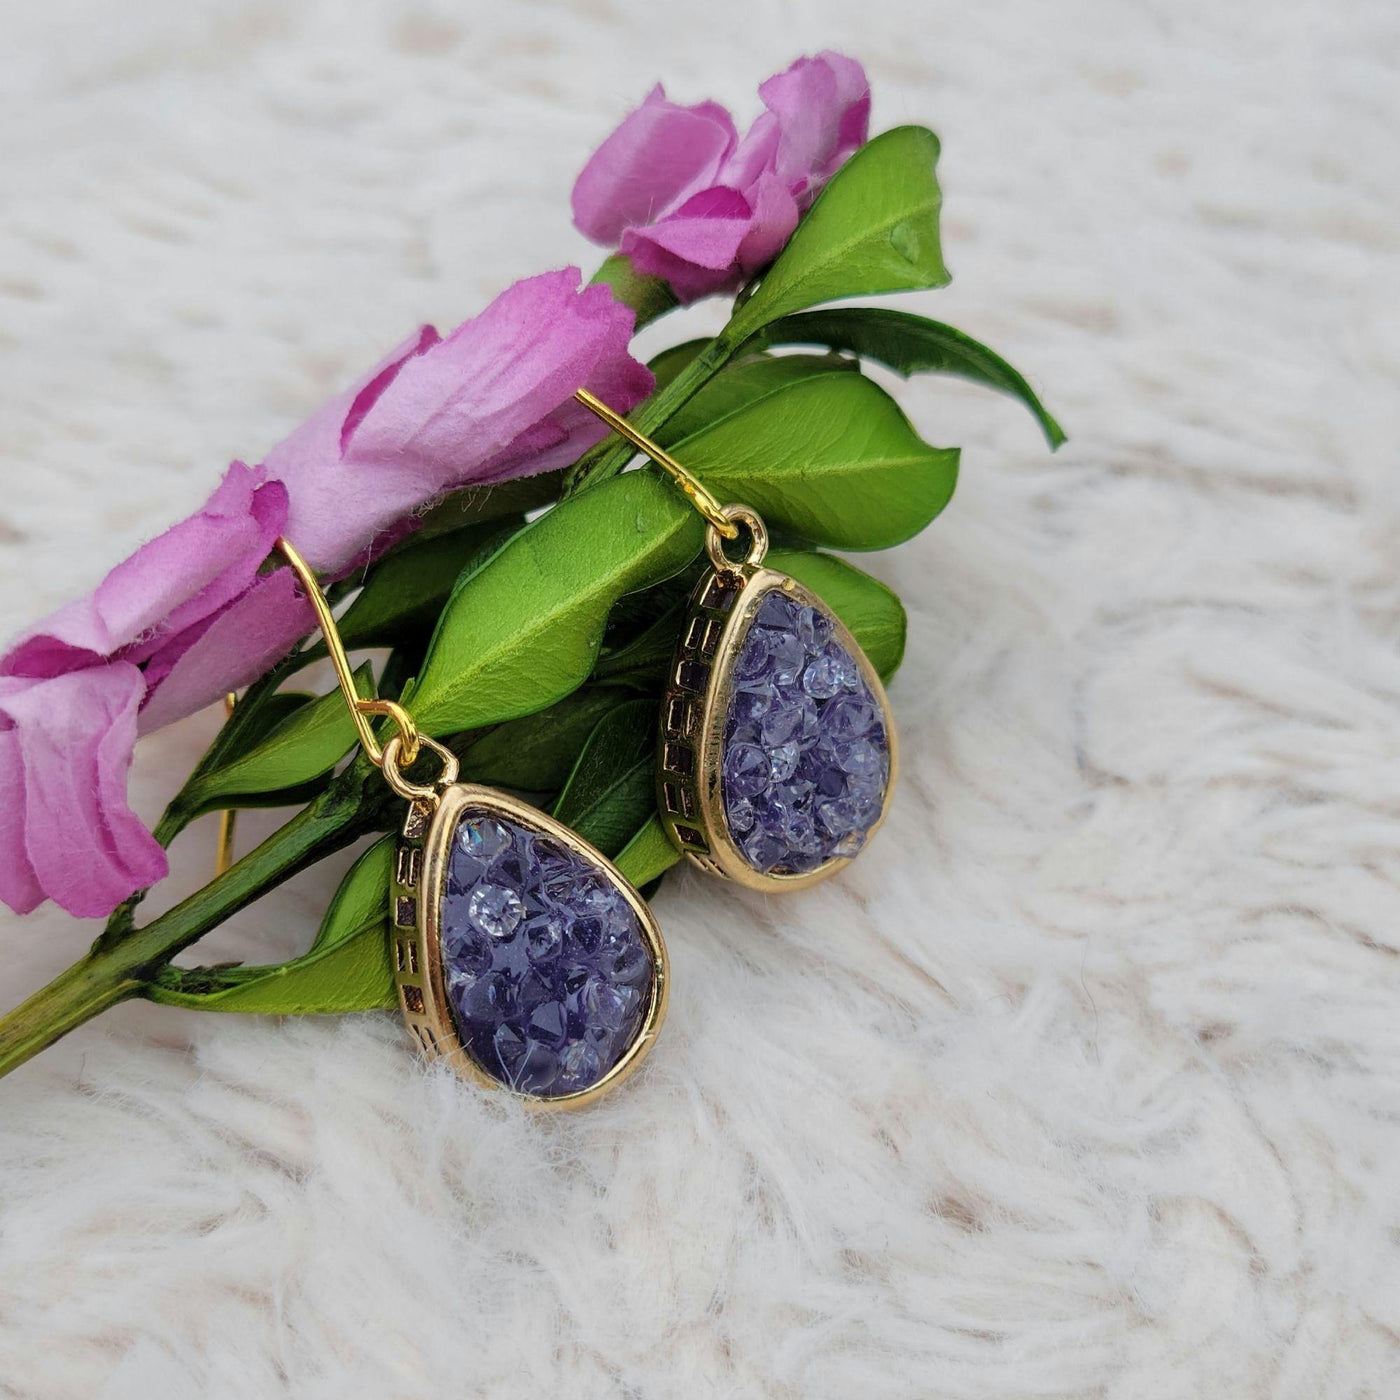 NEW Blue Druzy Gold Color Dangle Drop Earrings - 1.25 Inches Long - Accessories - dalia + jade 